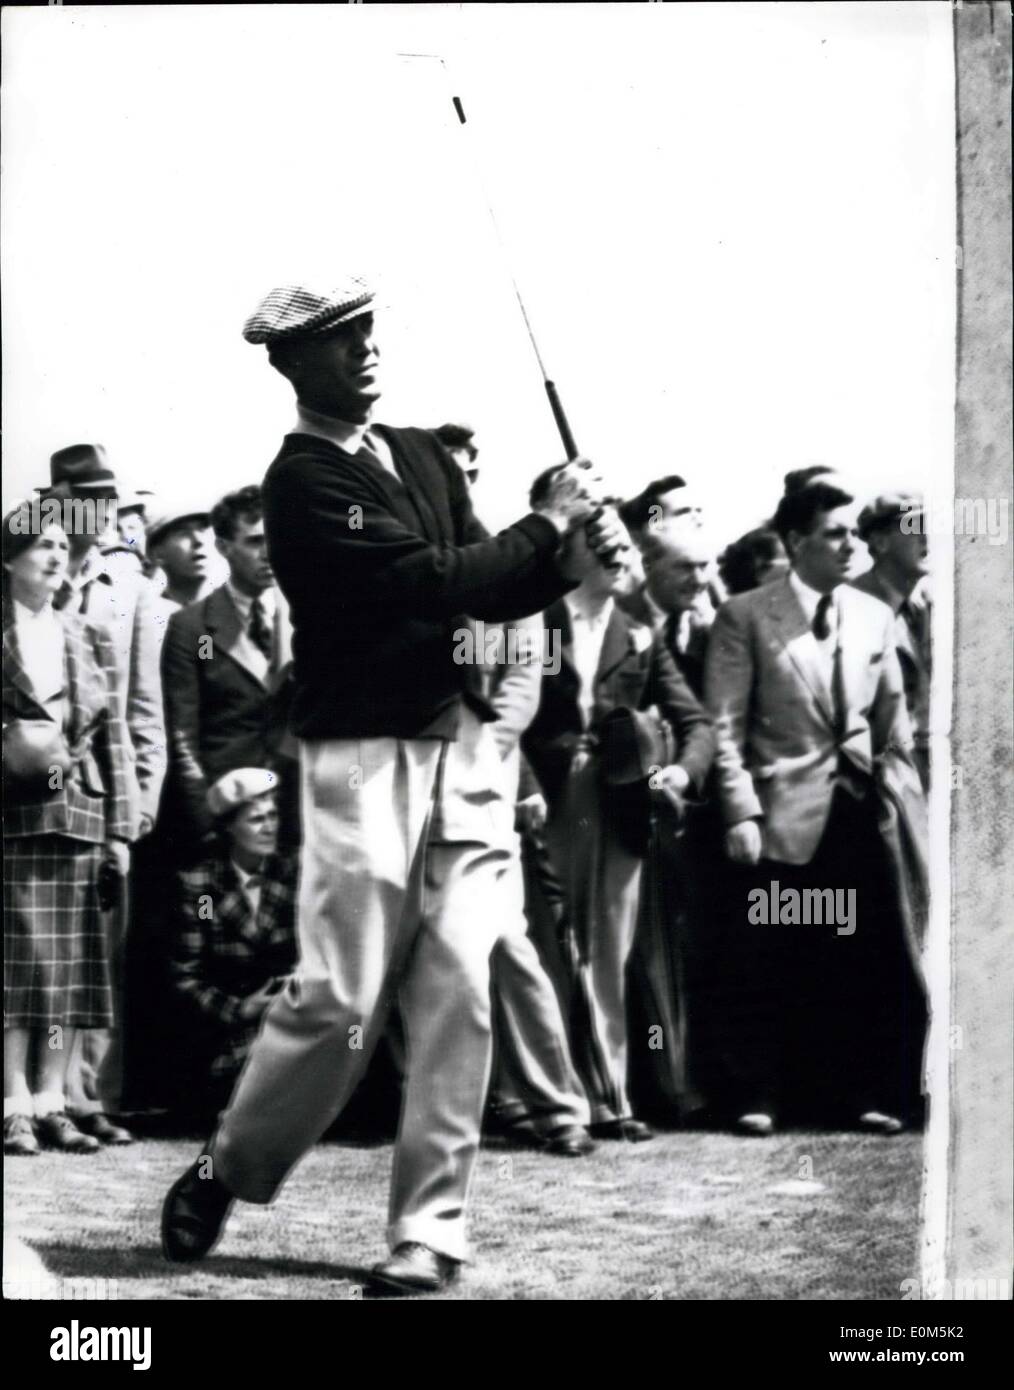 Jul. 08, 1953 - 8-7-53 British Open Golf Championship. Bobby Locke, the reigning champion, is leading the field in the British Open Golf Championship being held in Carnoustie. U.S. champion, Ben Hogan was nine points behind Locke after yesterday's play. Keystone Photo Shows: Ben Hogan driving from the 2nd tee, at Carnoustie yesterday. Stock Photo